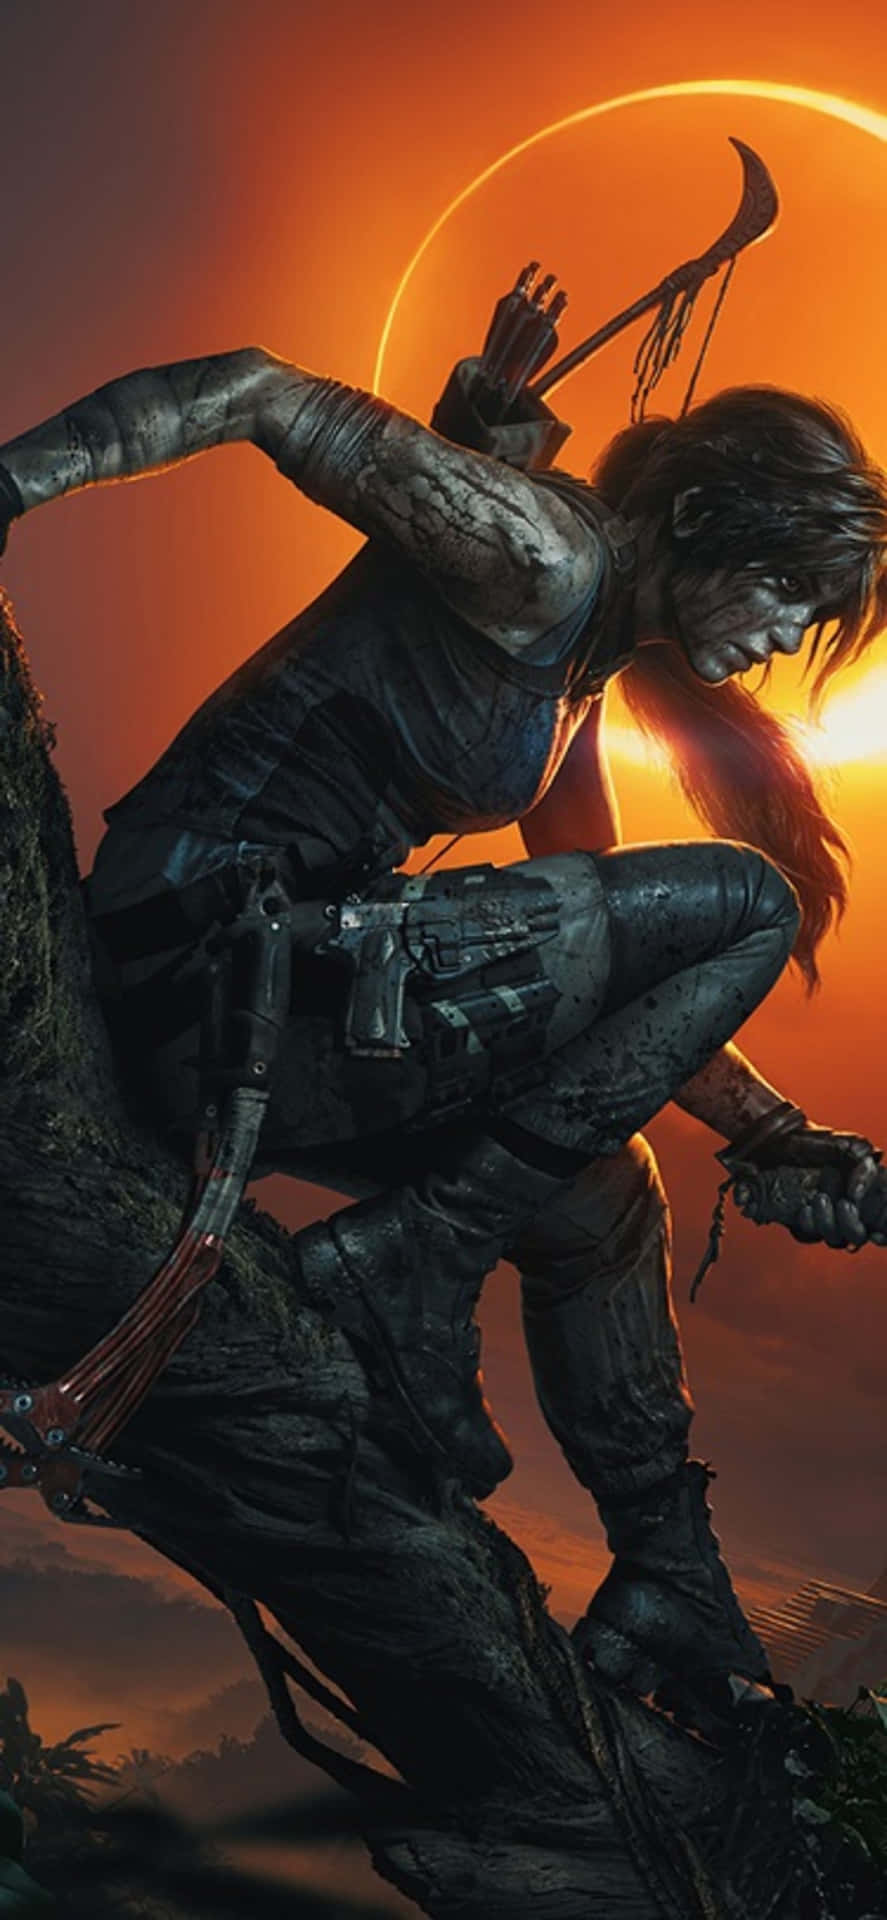 Unlock the secrets of the ancient ruins in Shadow of the Tomb Raider